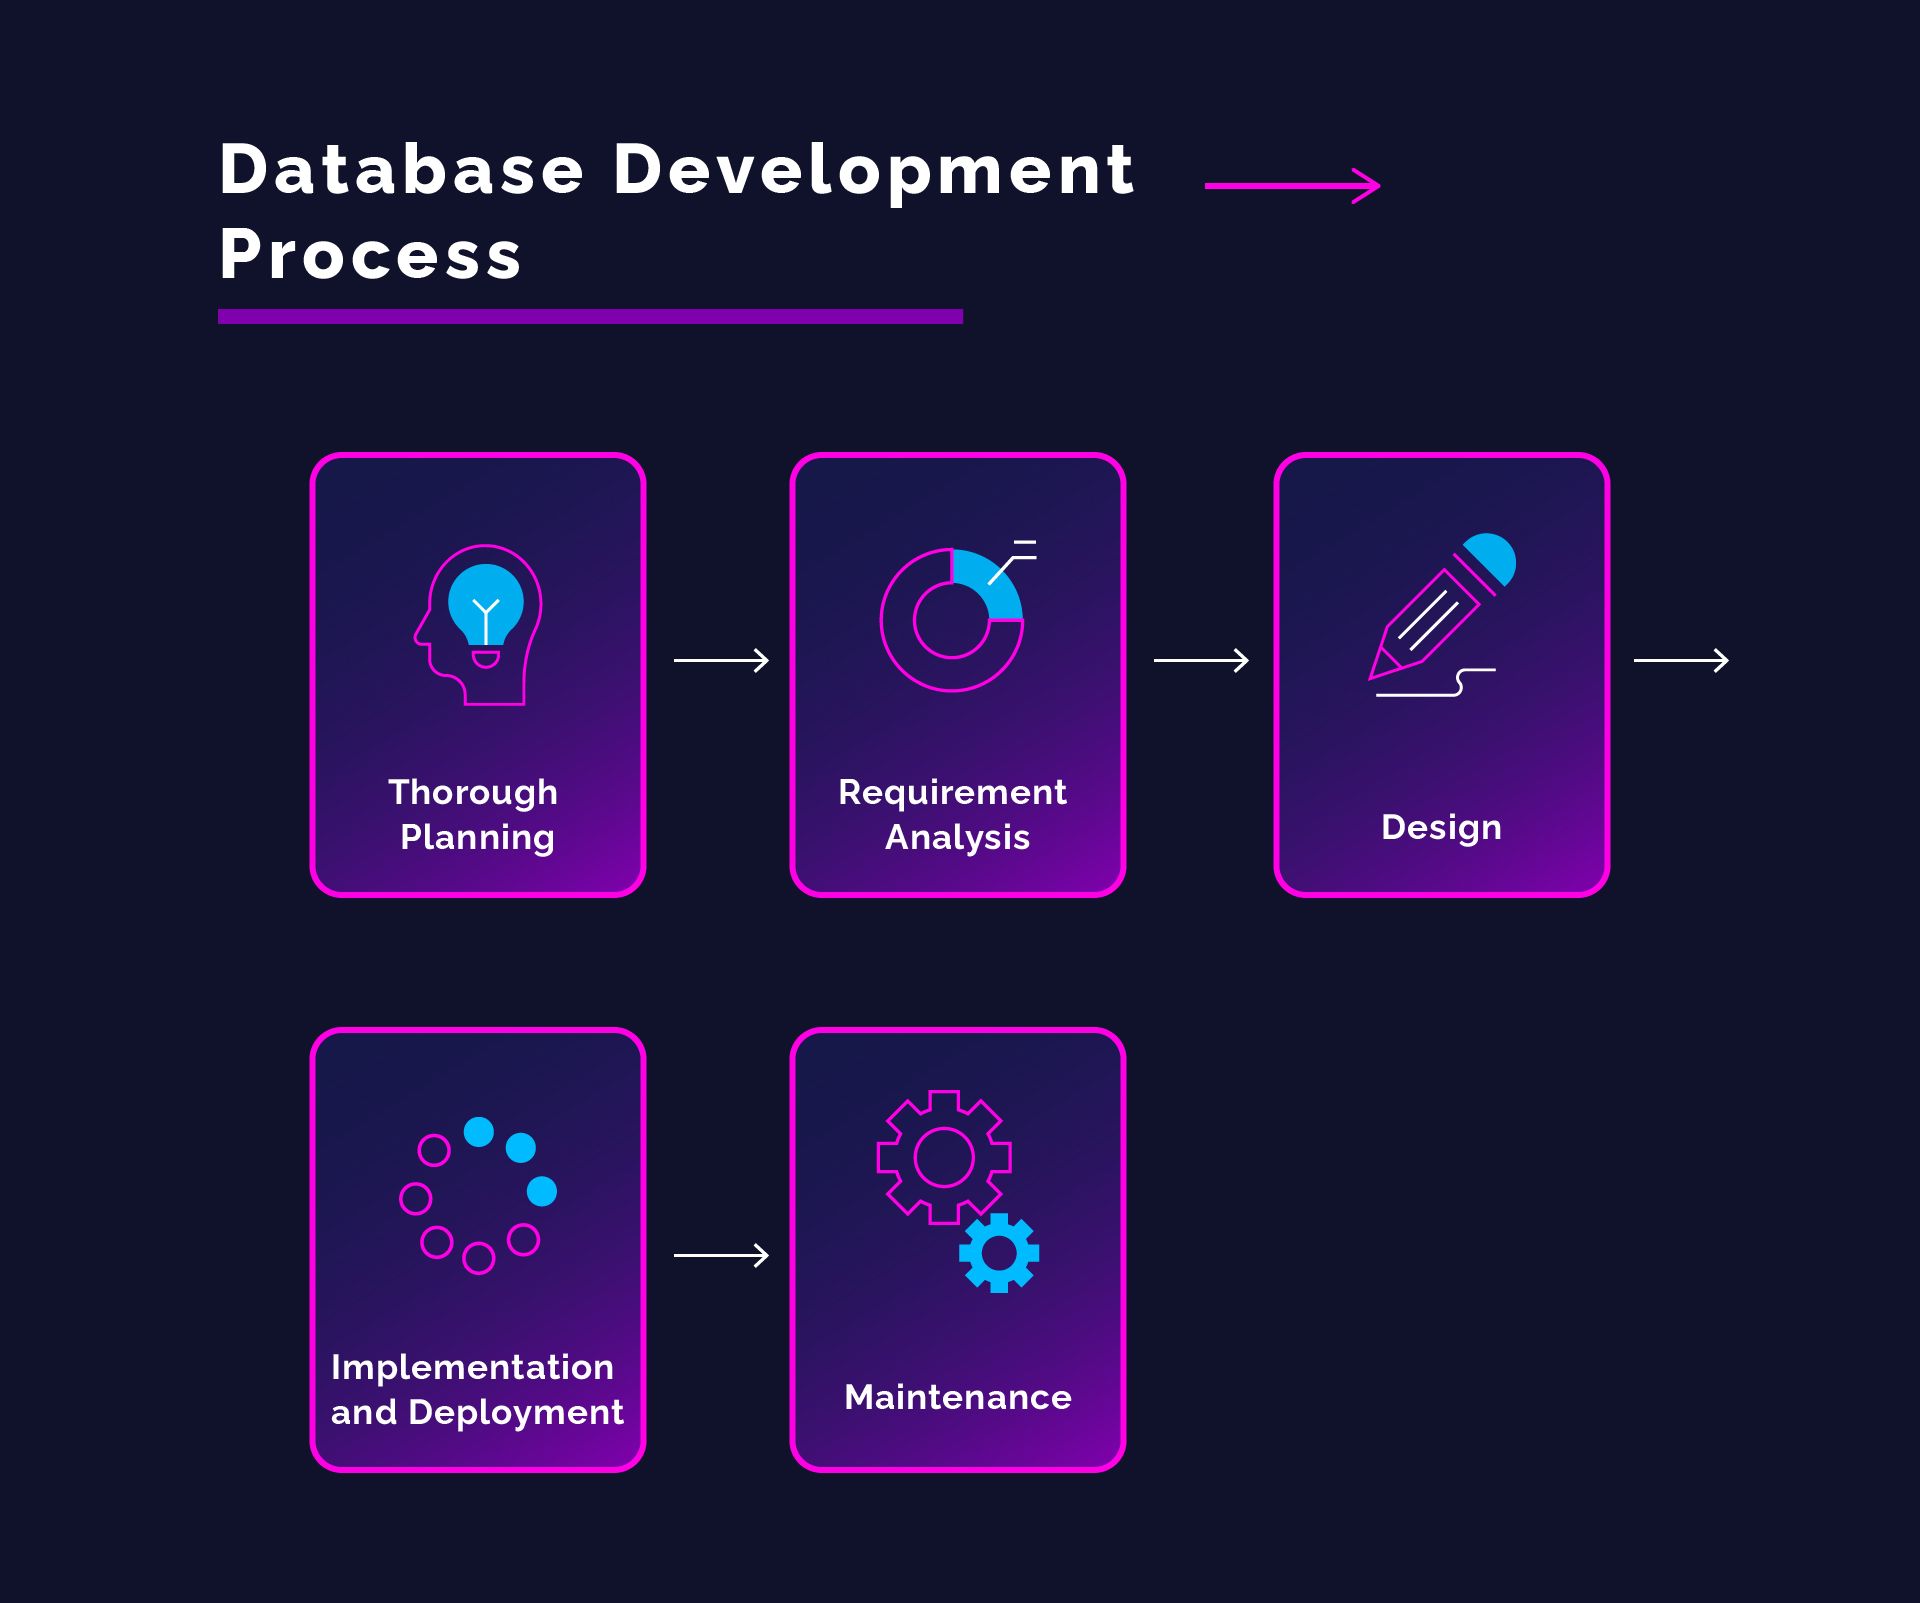 What is needed at all stages of the process of developing a database system